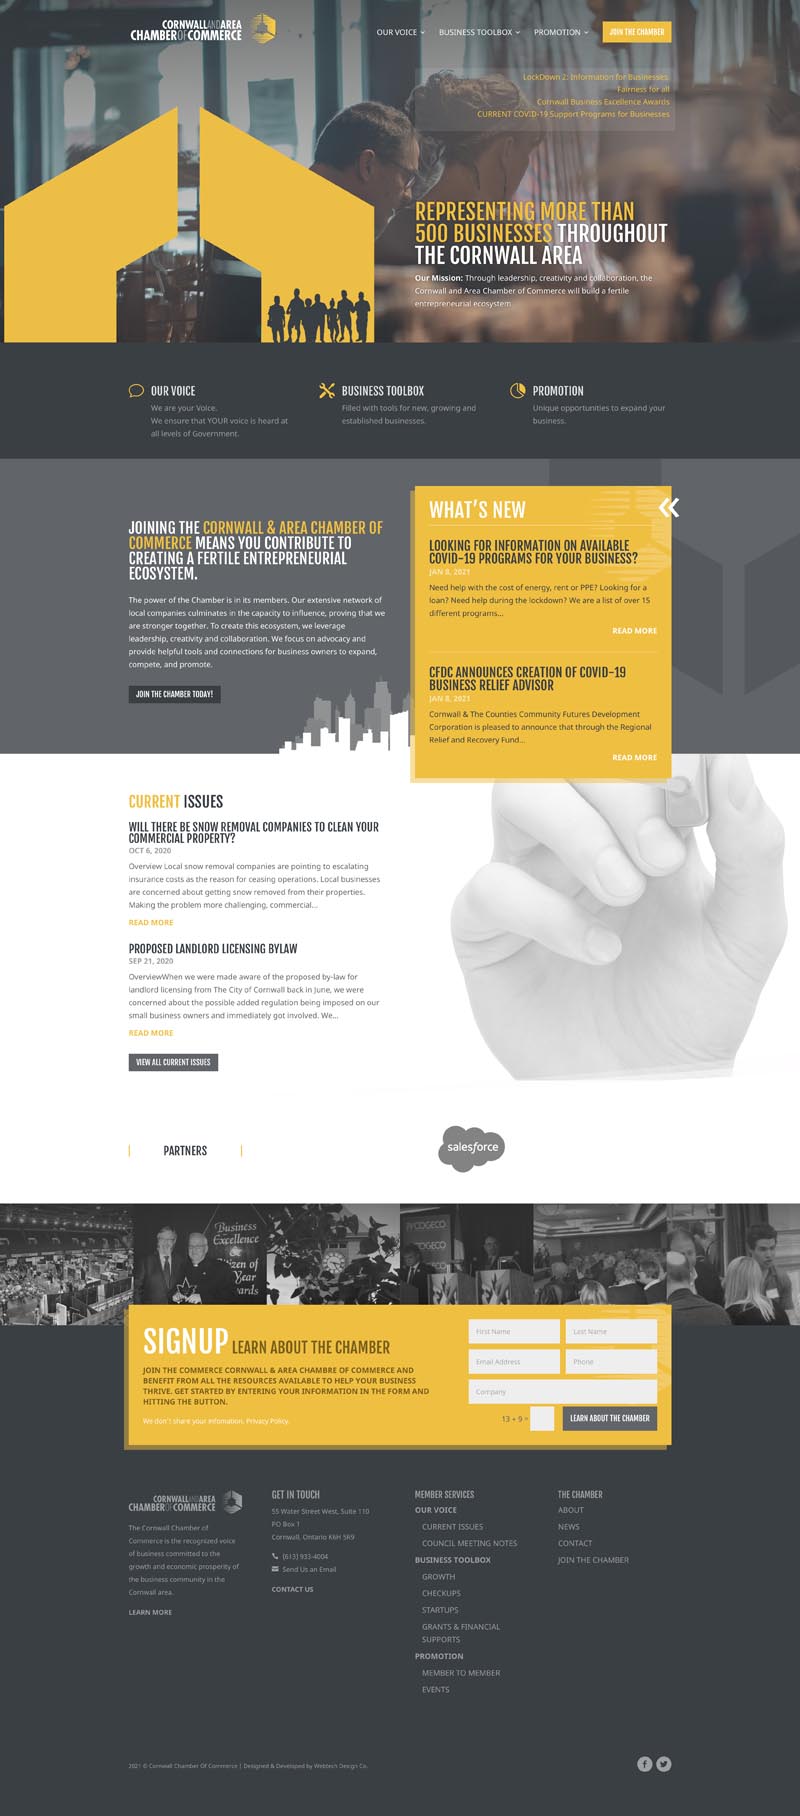 Not for Profit web design services for Cornwall Chamber of Commerce